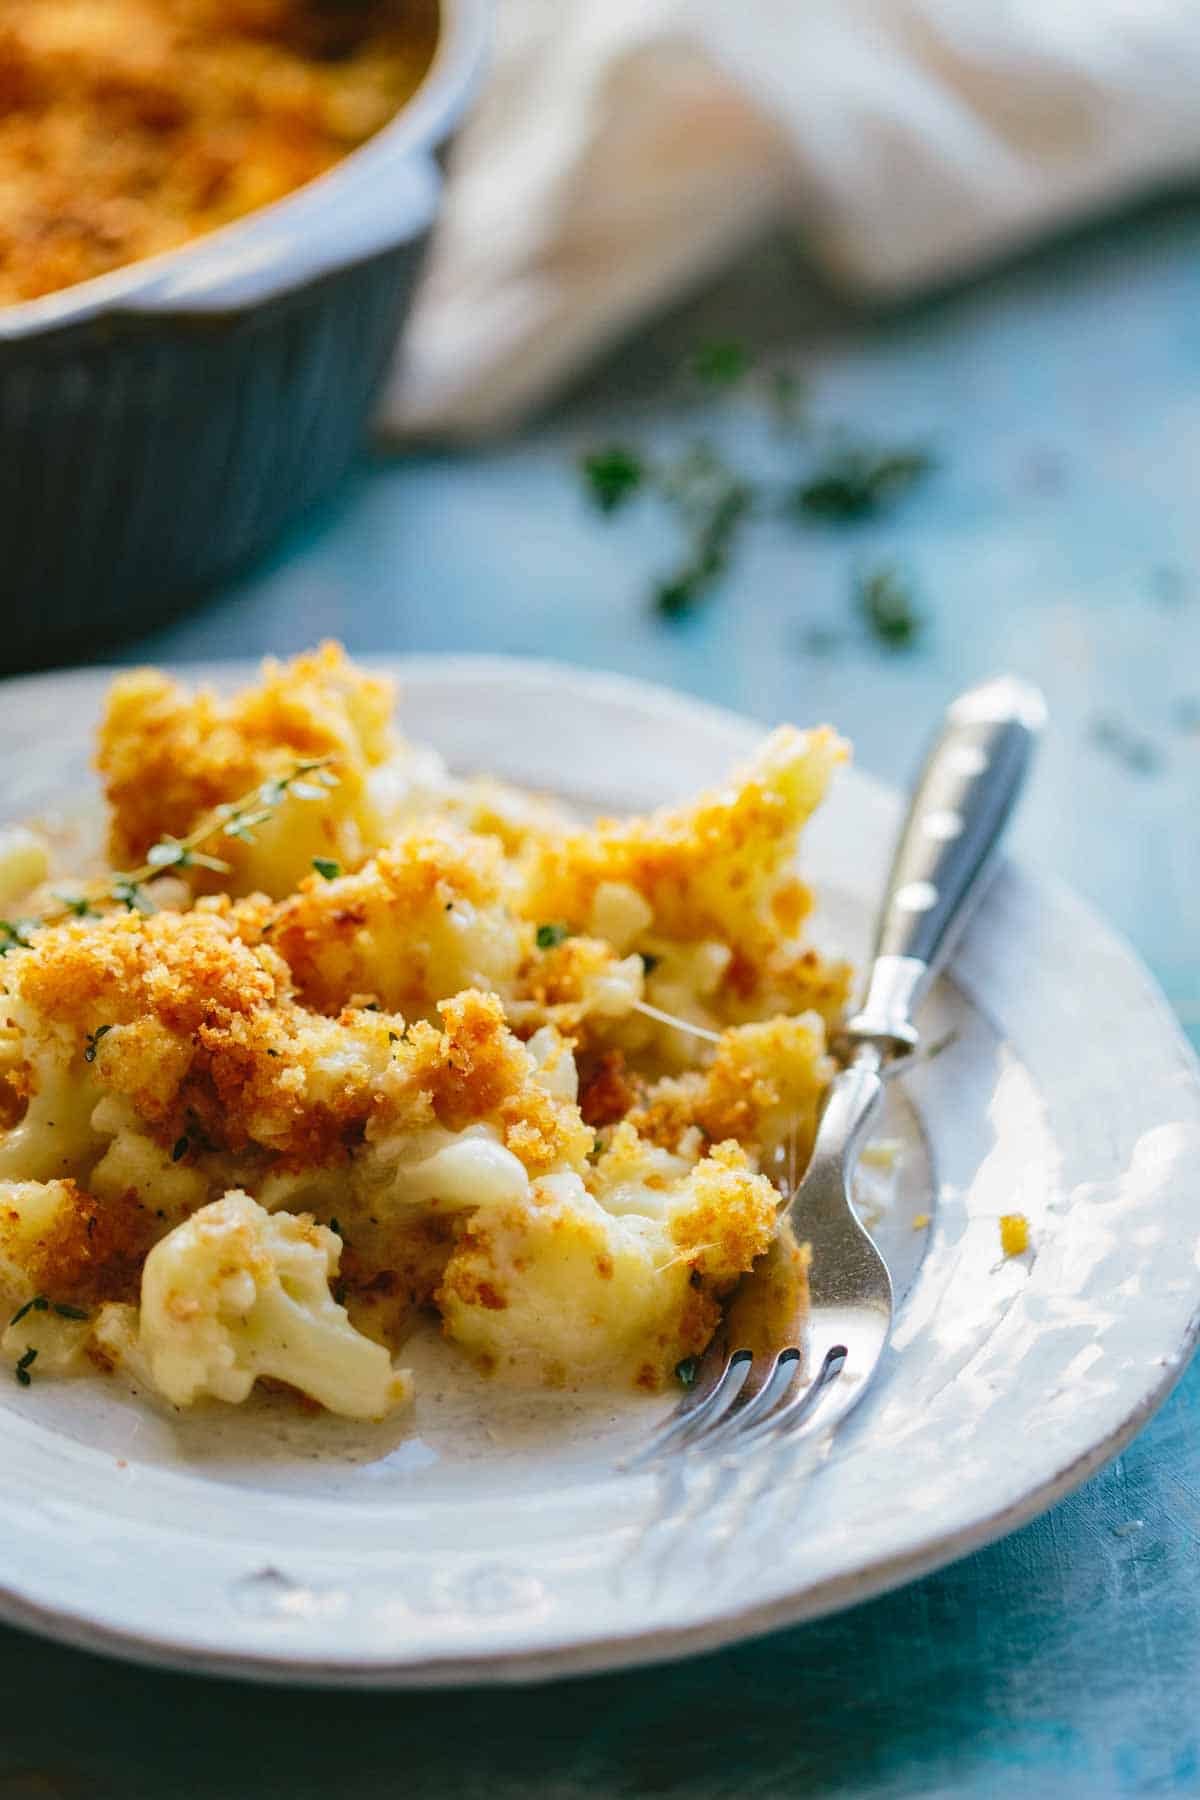 Side view of a plate of cauliflower gratin with a fork.